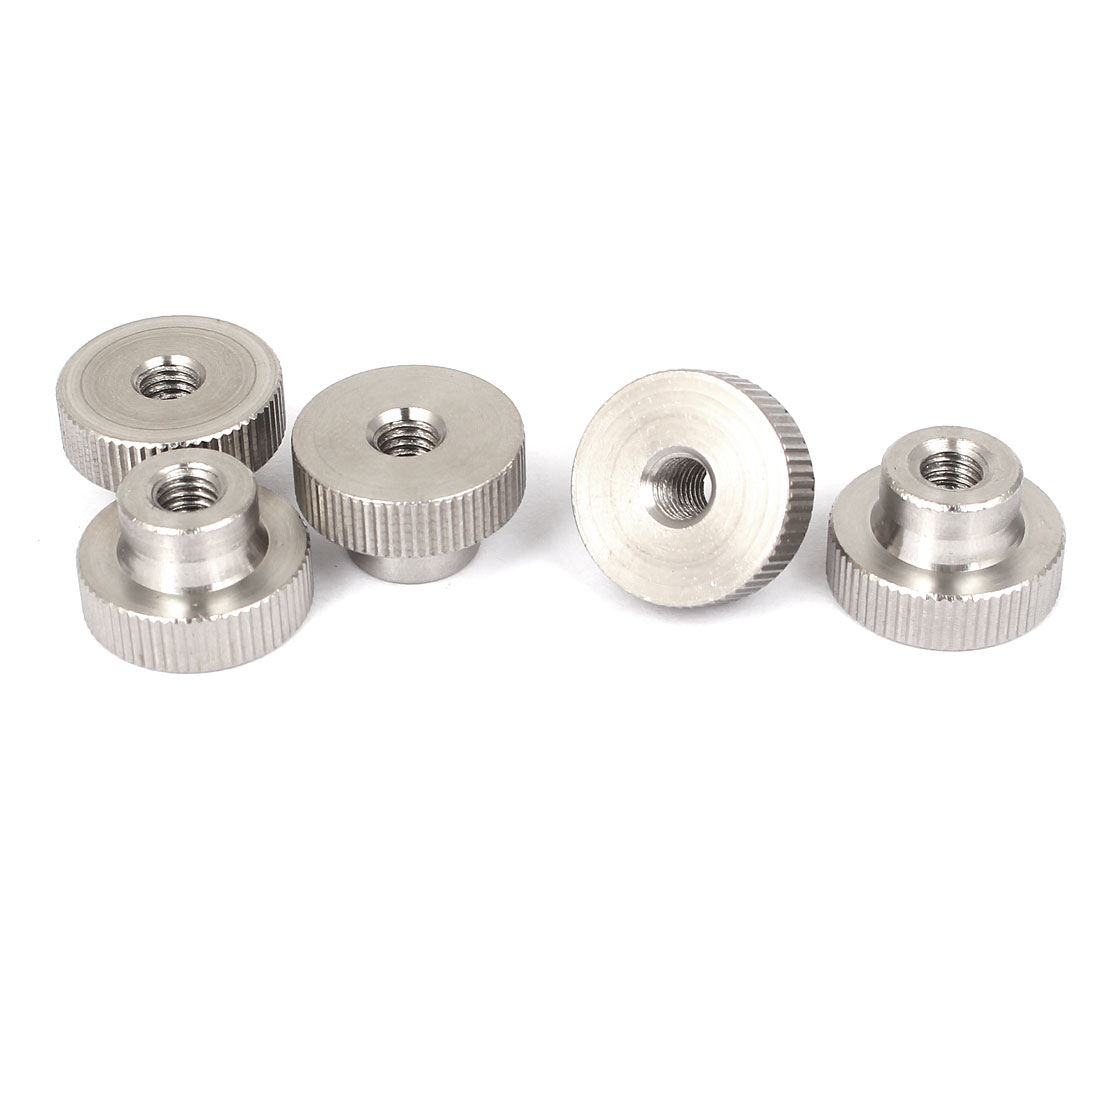 Pcs M6 304 Stainless Steel Metric Knurled Thumb Nuts for 3D Printer  Heated Bed